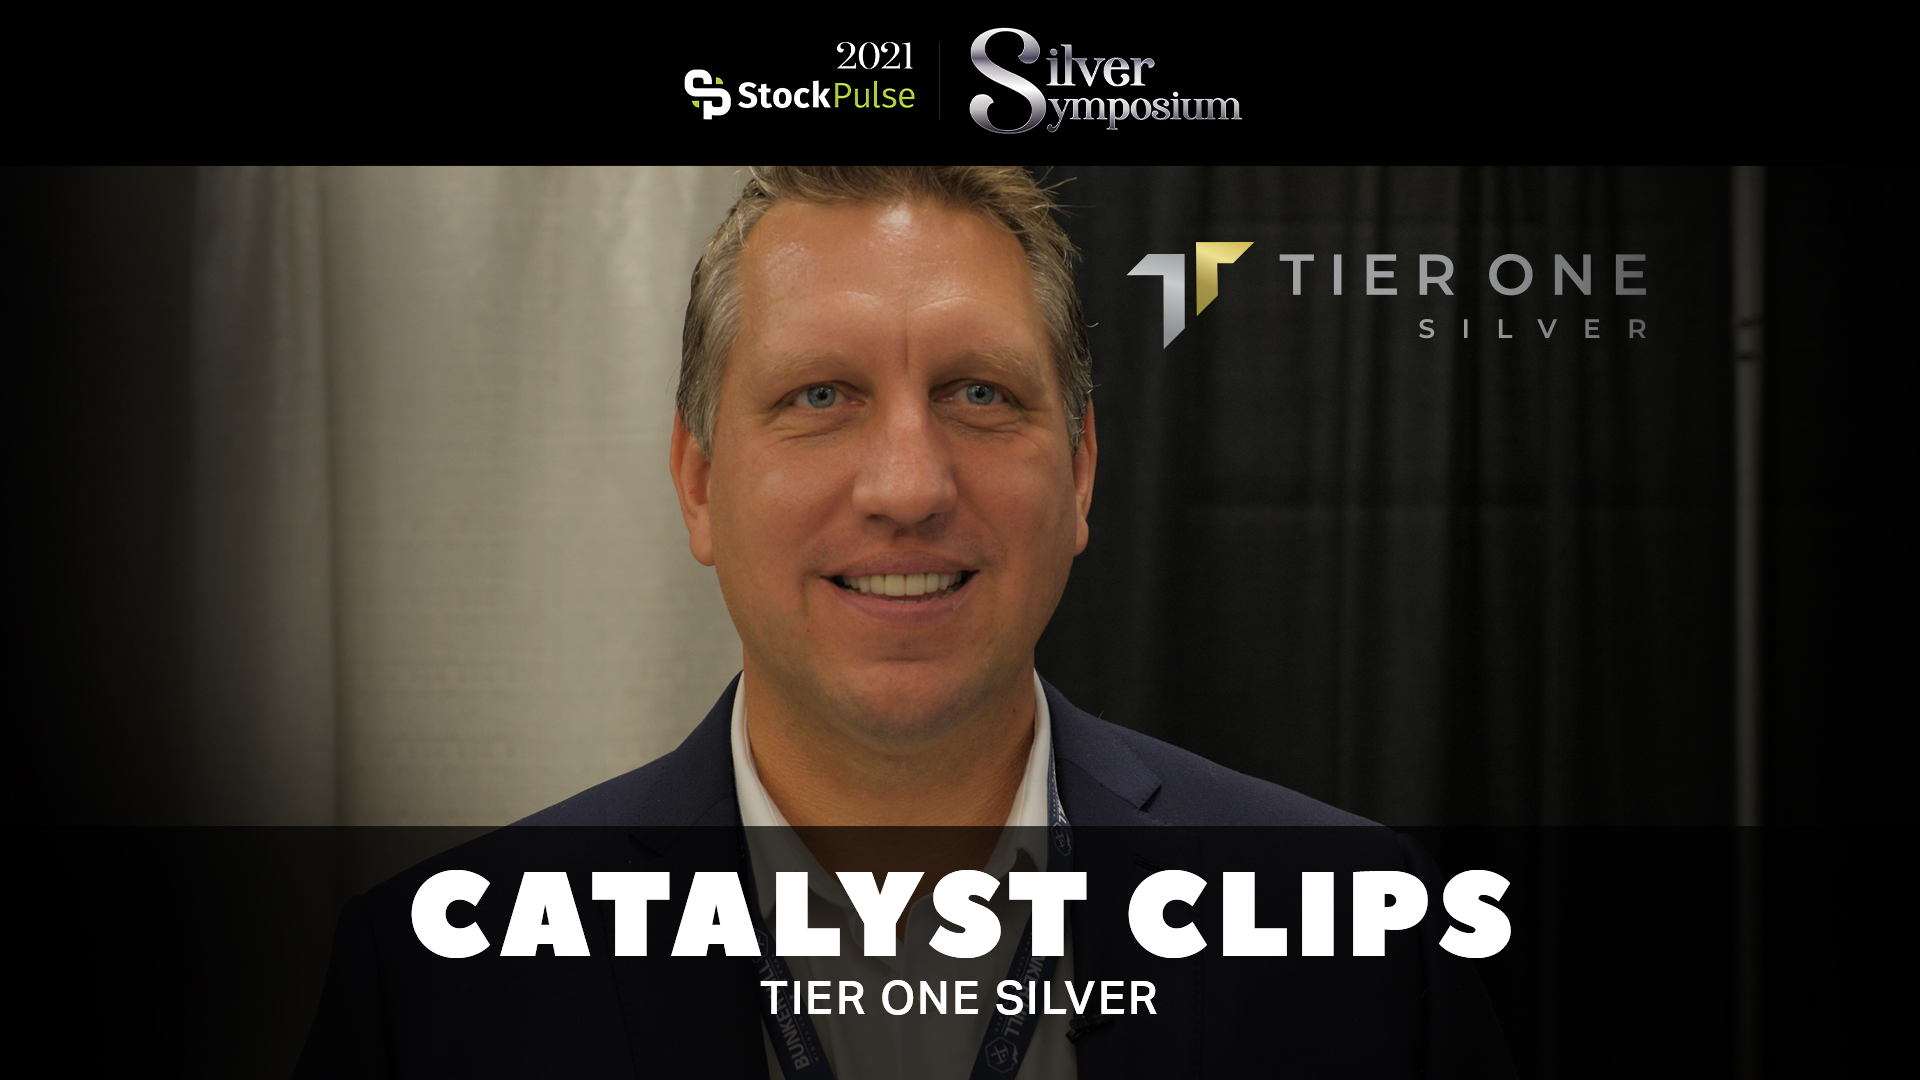 2021 StockPulse Silver Symposium Catalyst Clips | Peter Dembicki of Tier One Silver